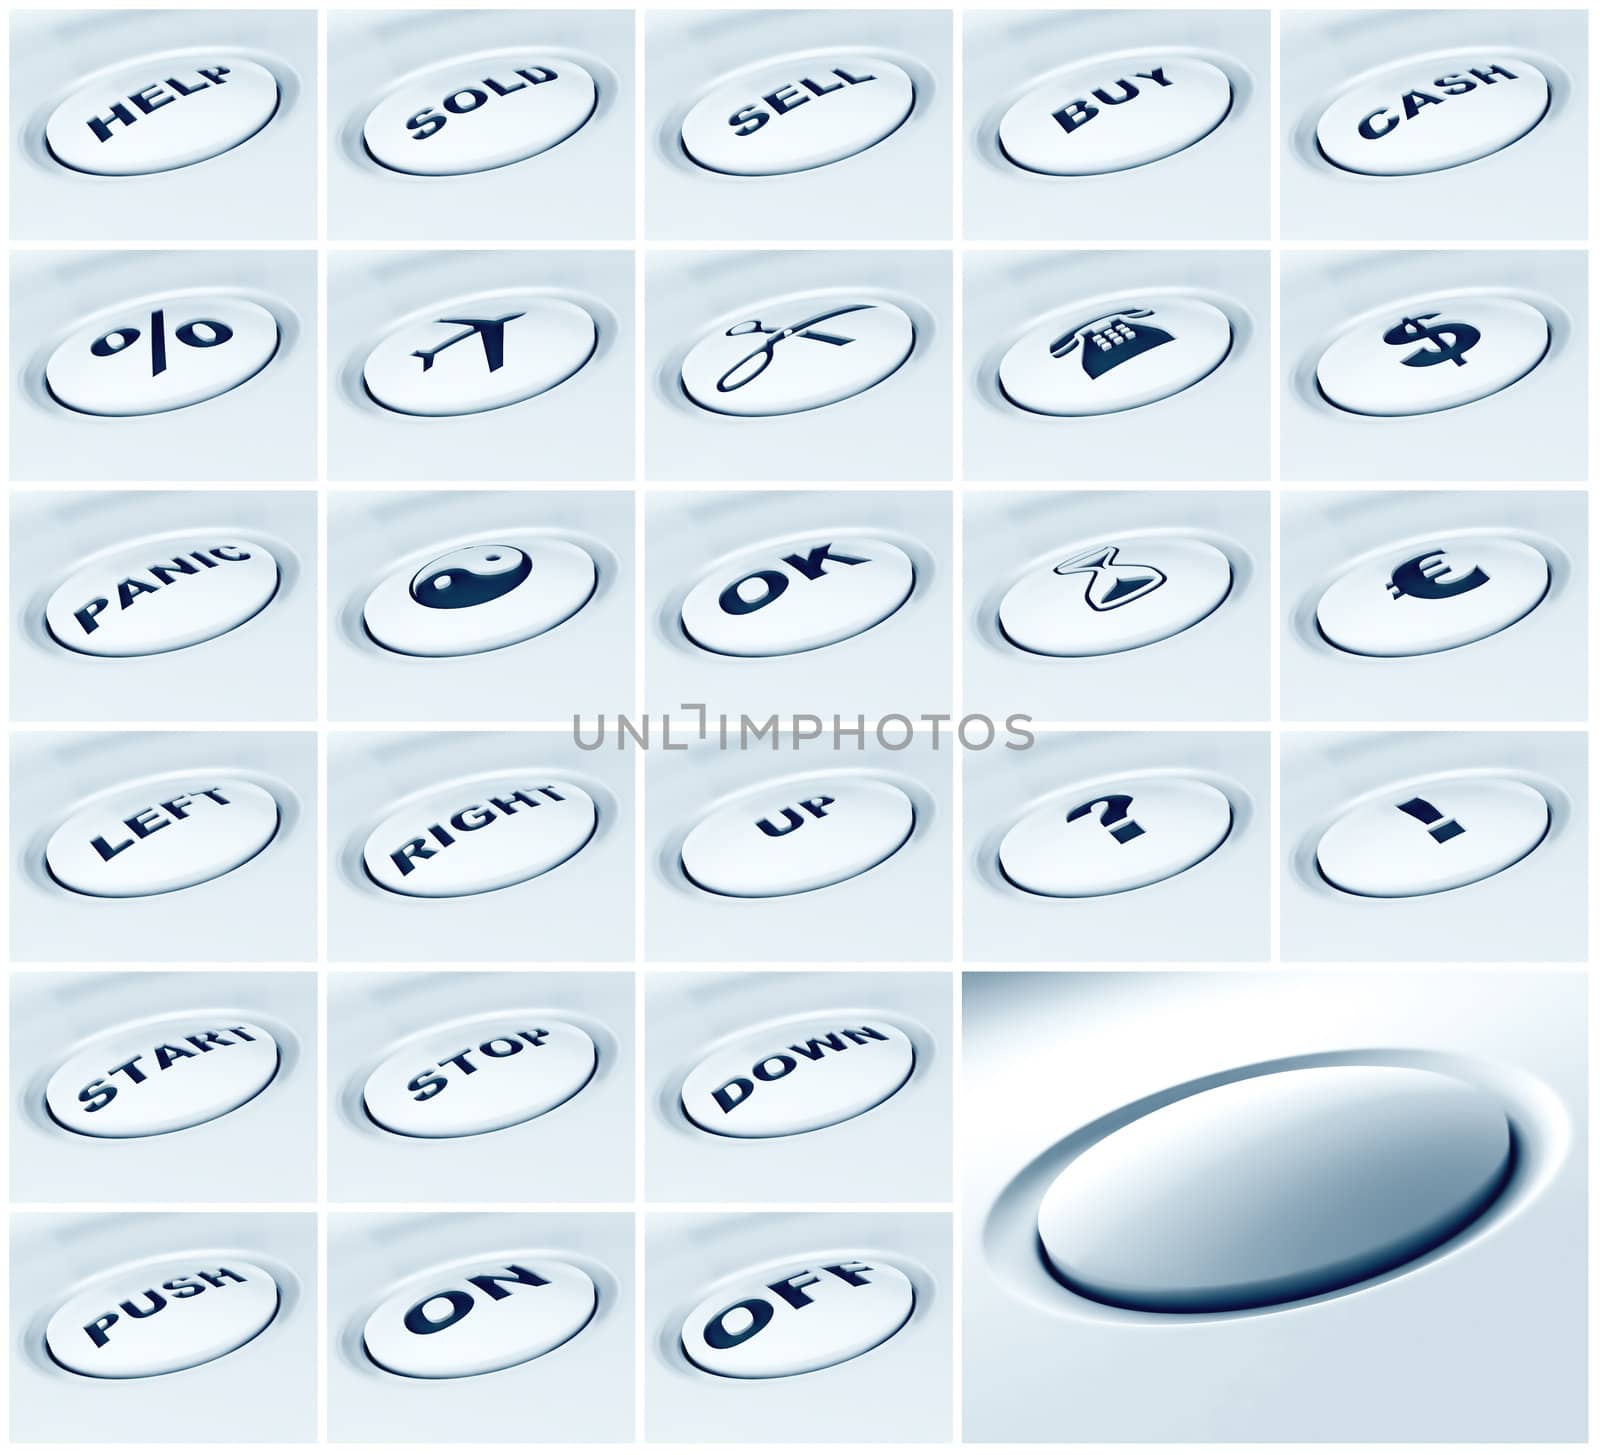 set of white plastic buttons with different signs and symbols